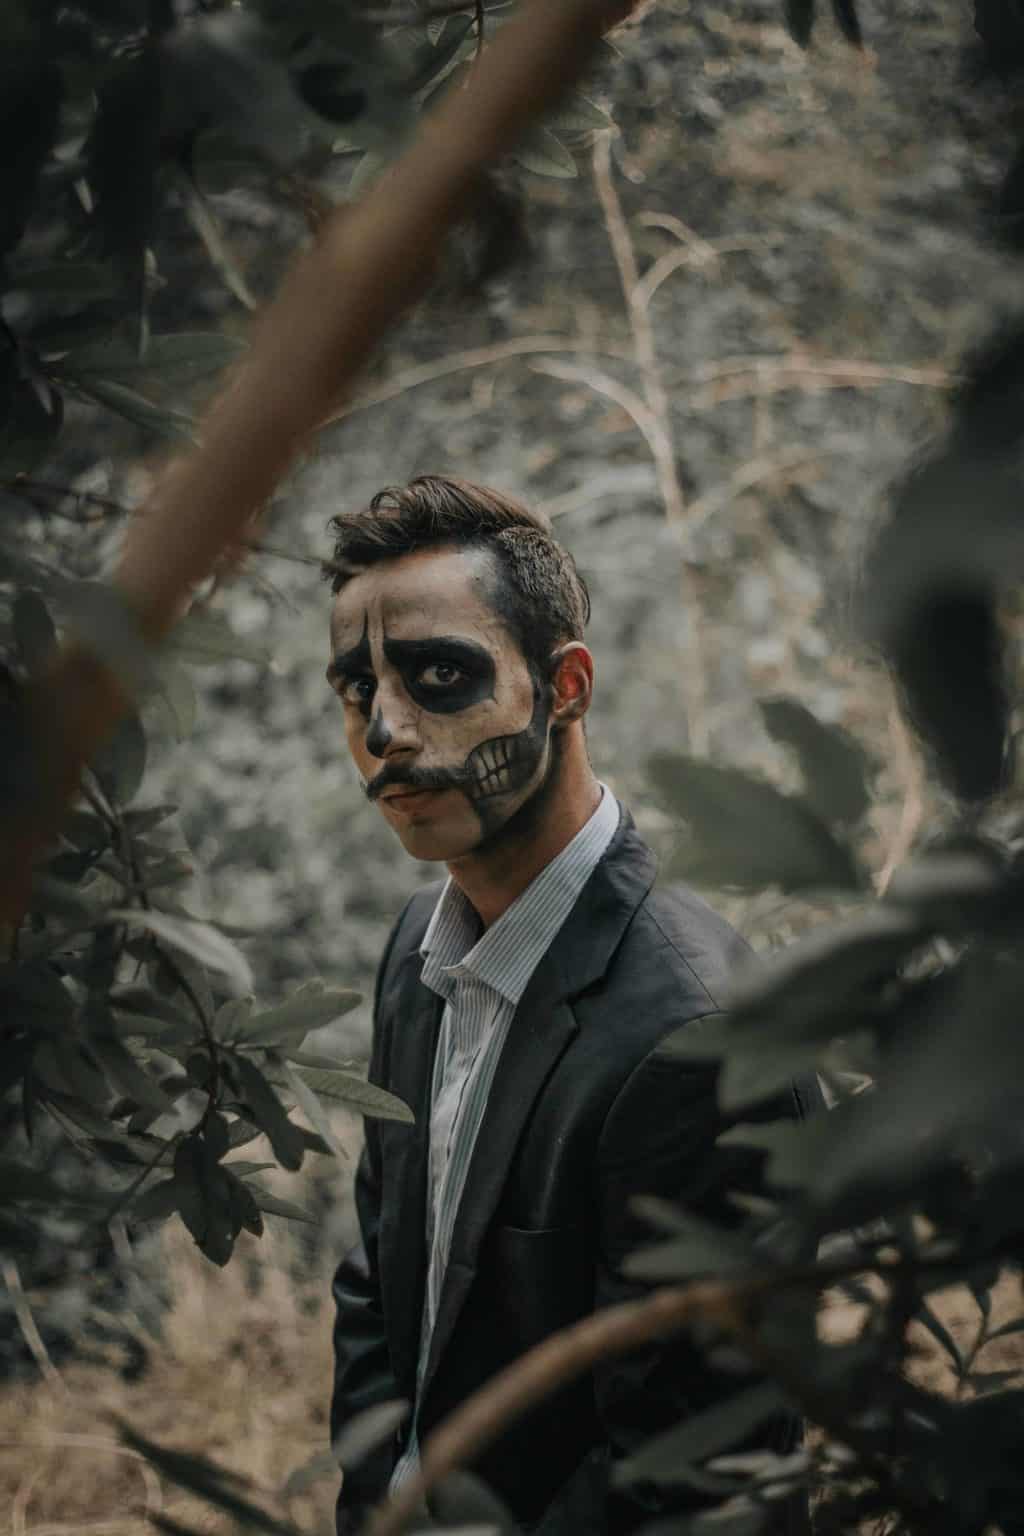 A man face-painted with skeleton drawing